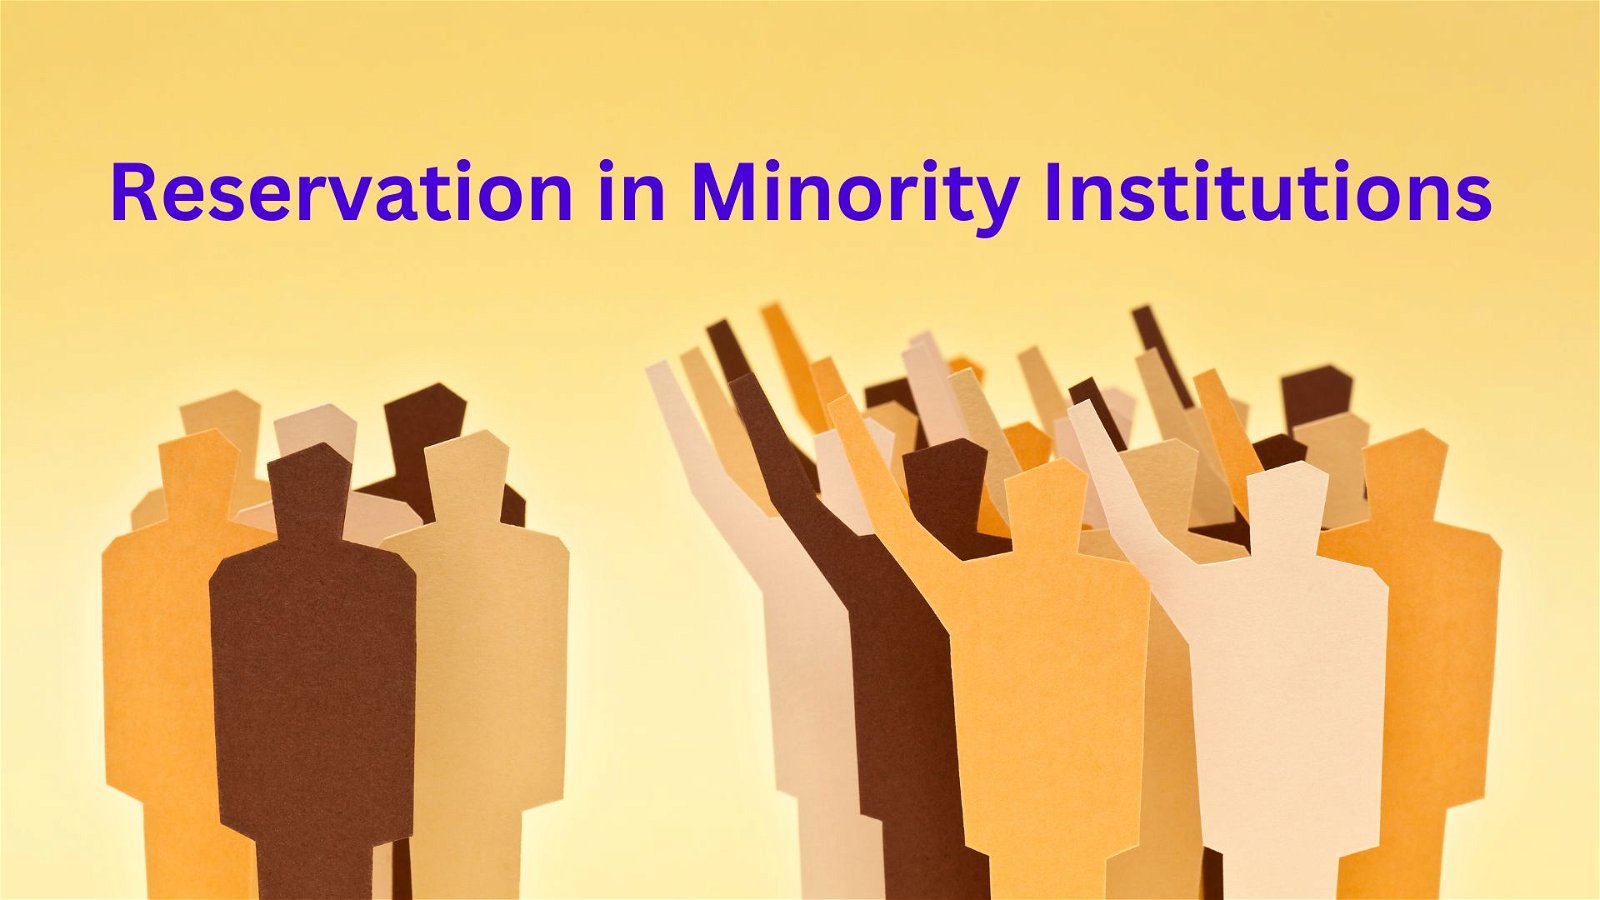 Reservation in Minority Institutions